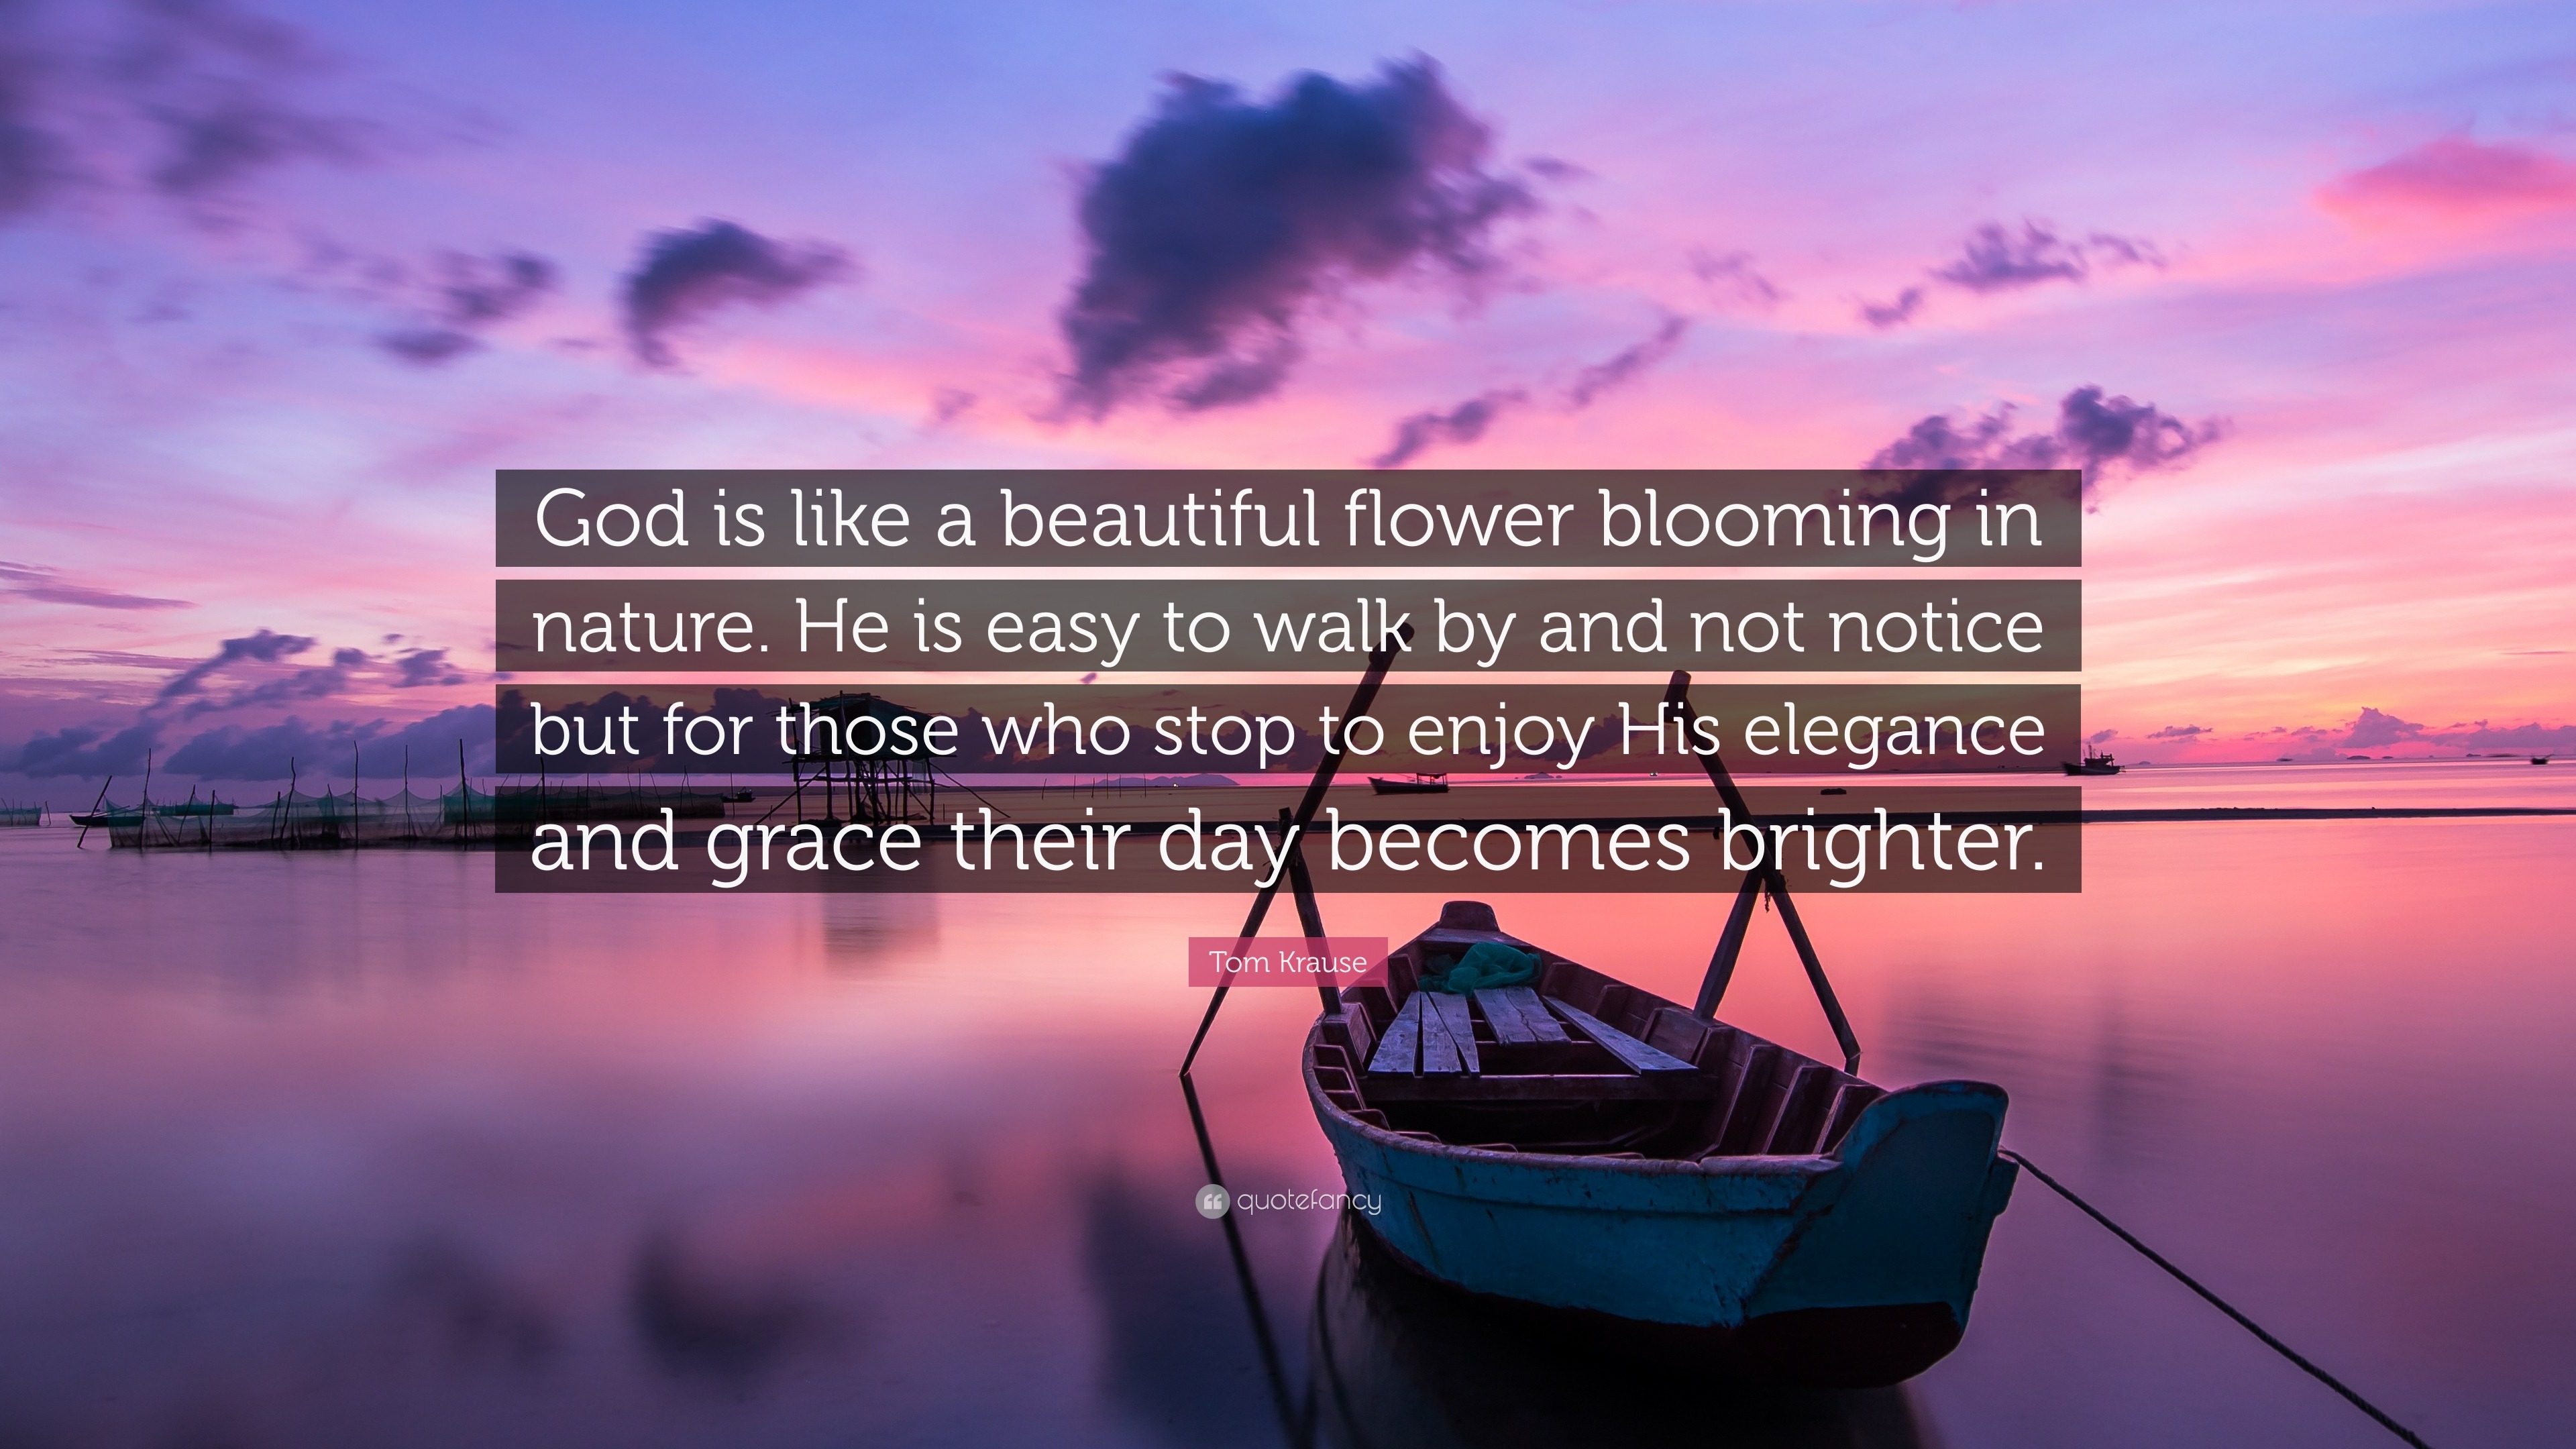 Tom Krause Quote God Is Like A Beautiful Flower Blooming In Nature He Is Easy To Walk By And Not Notice But For Those Who Stop To Enjoy